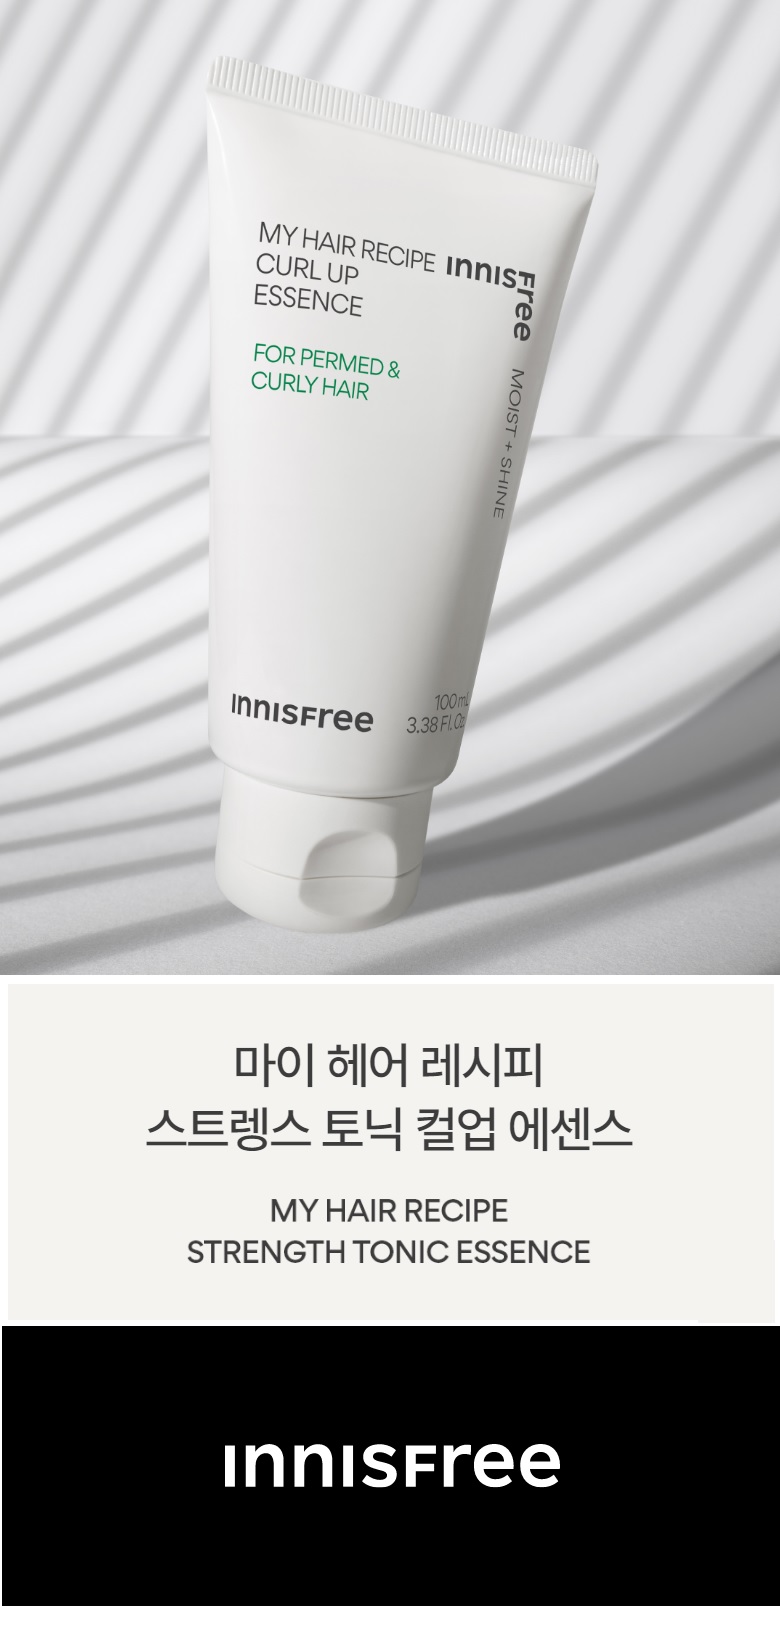 Innisfree My Hair Recipe Curl Up Essence for Permed and Curly Hair korean skincare product online shop malaysia denmark italy2